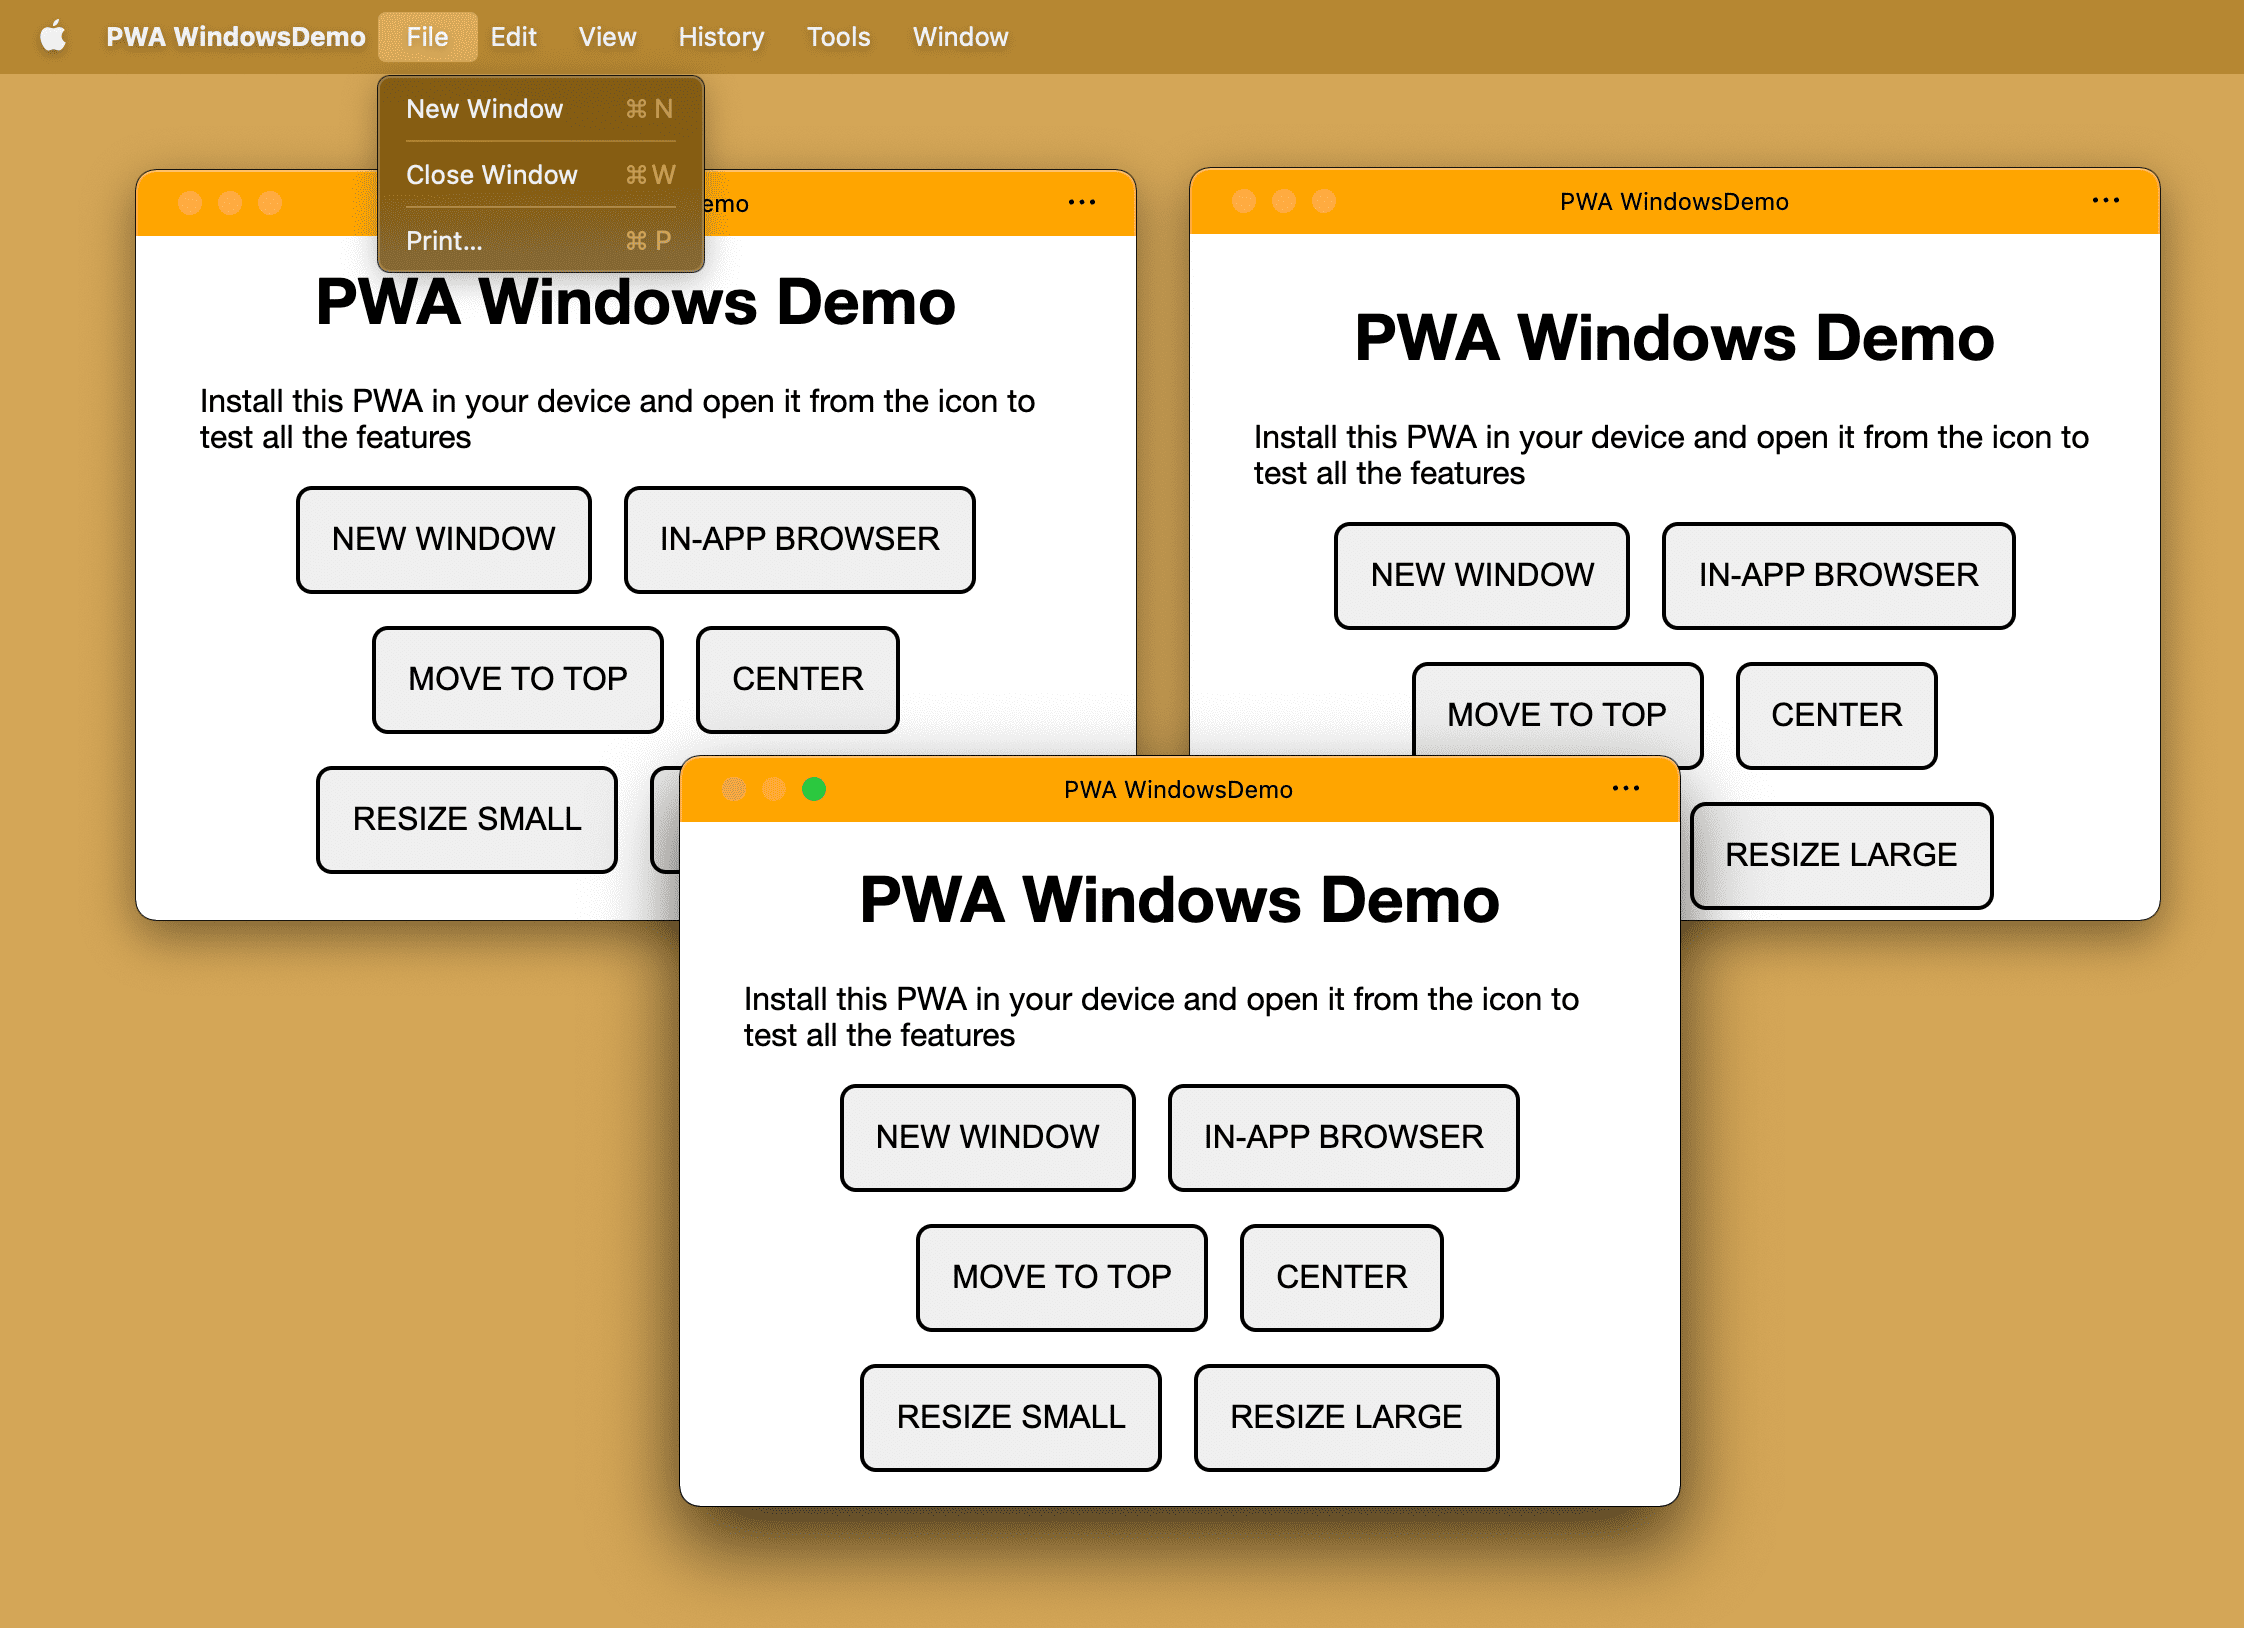 The same installed PWA with several windows opened on a desktop operating system.